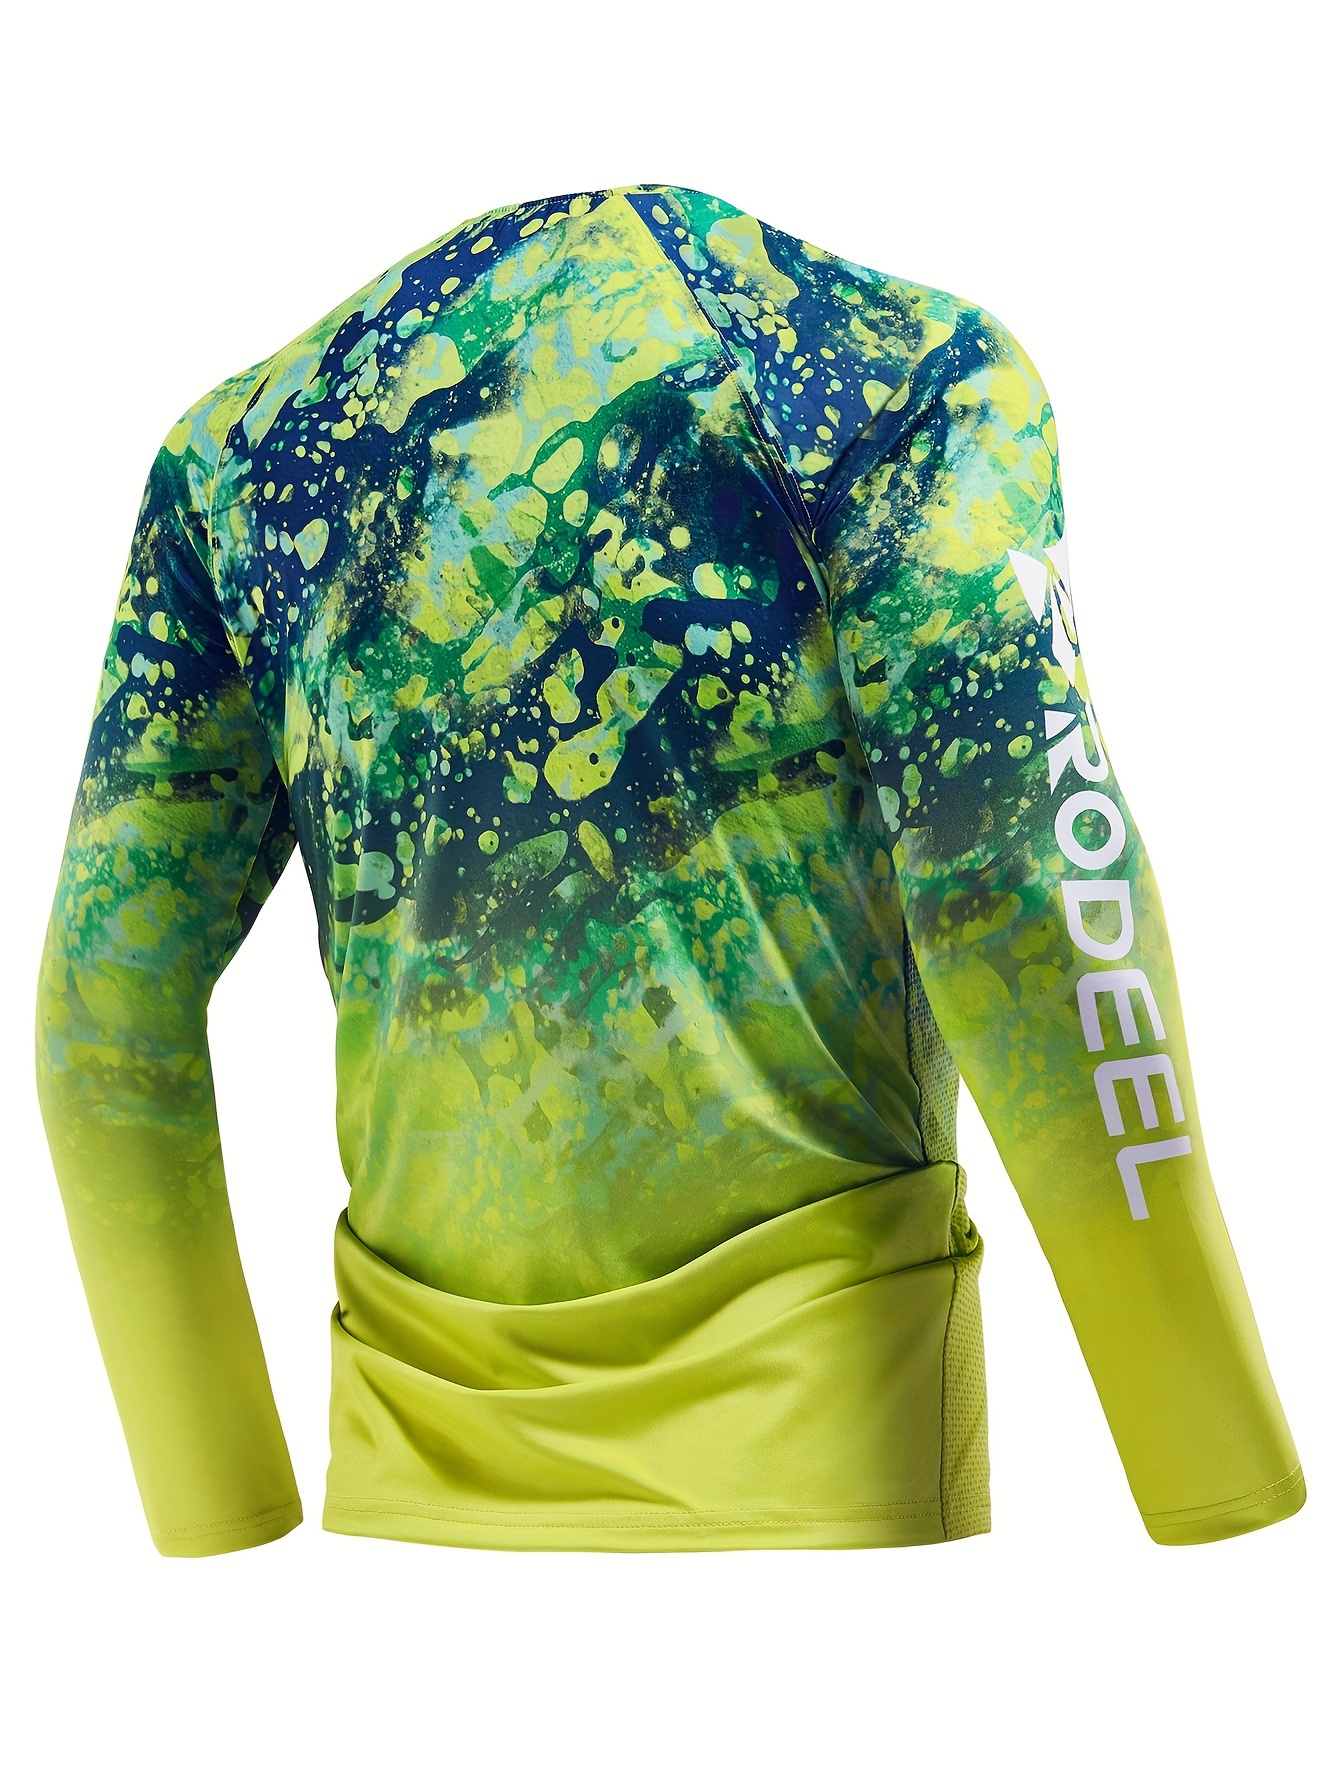 Green Cycloid Camo Fishing Shirt with Mesh Sides Small,SaltyScales